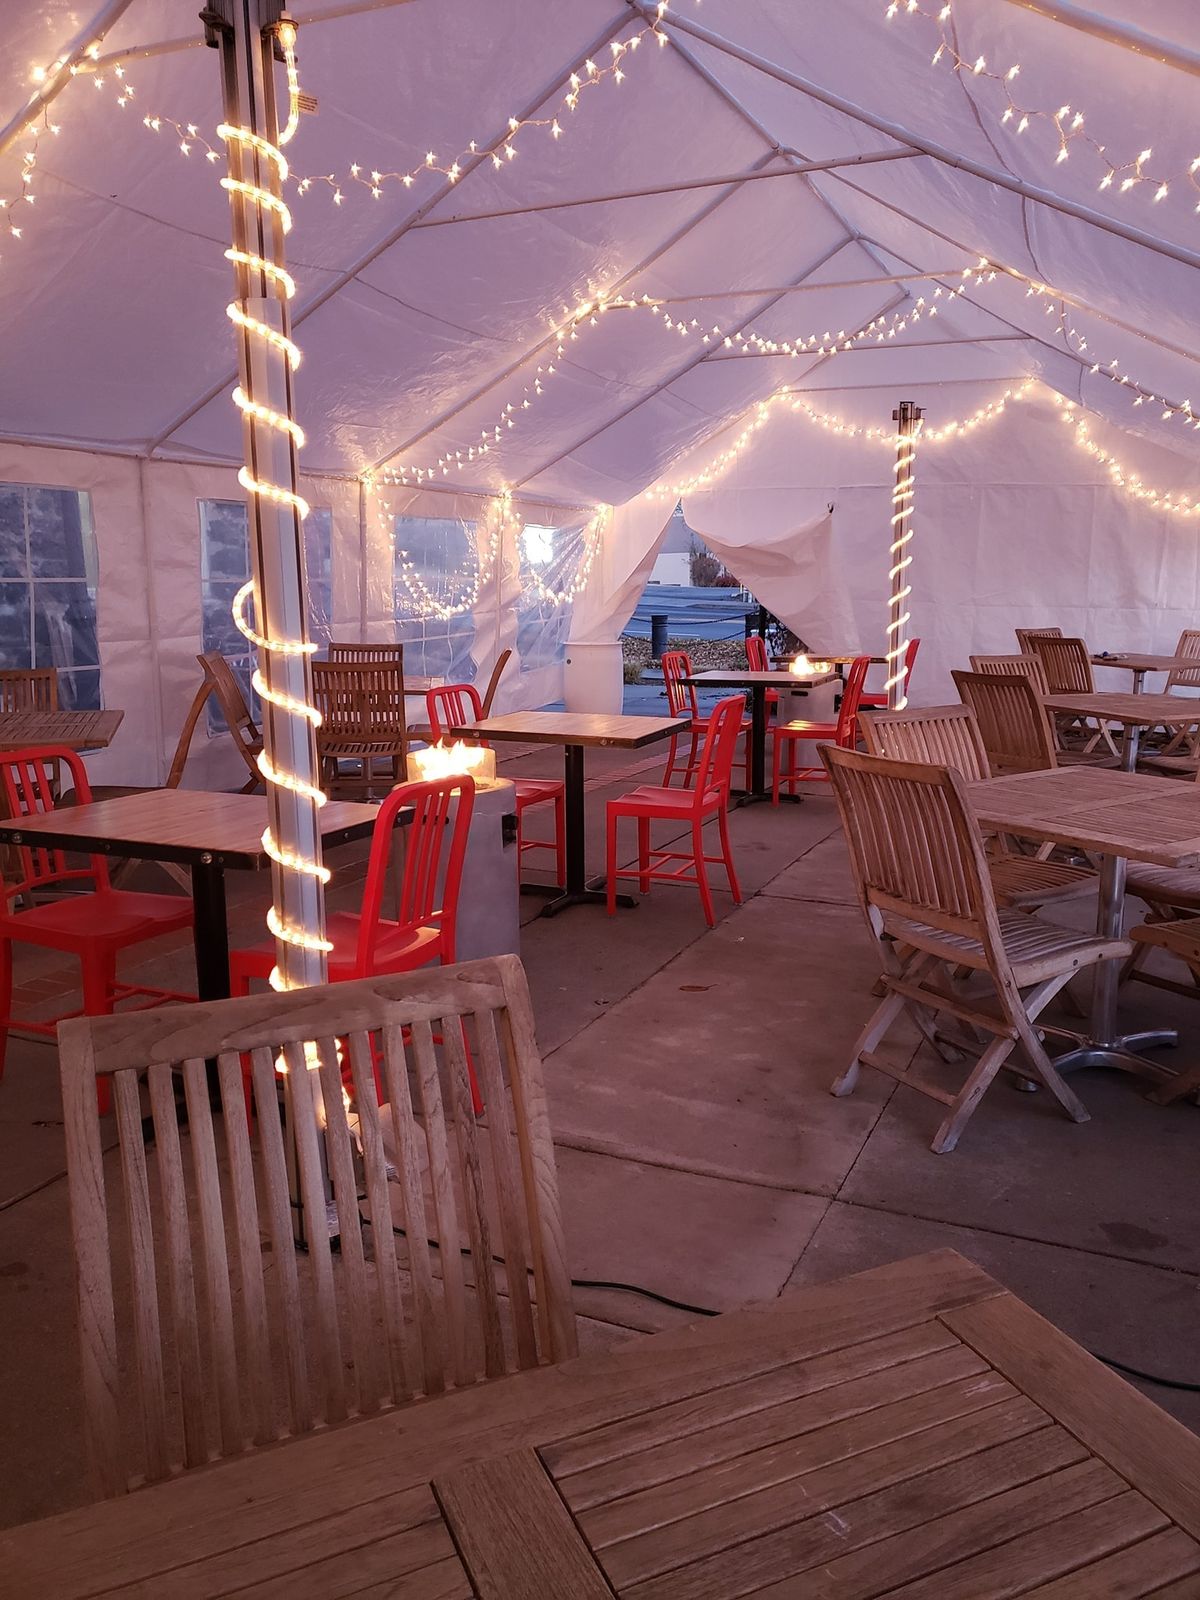 Bark, A Rescue Pub, which opened its doors in August, has installed a large vaulted tent with lights.  (Kris Kilduff/For The Spokesman-Review)